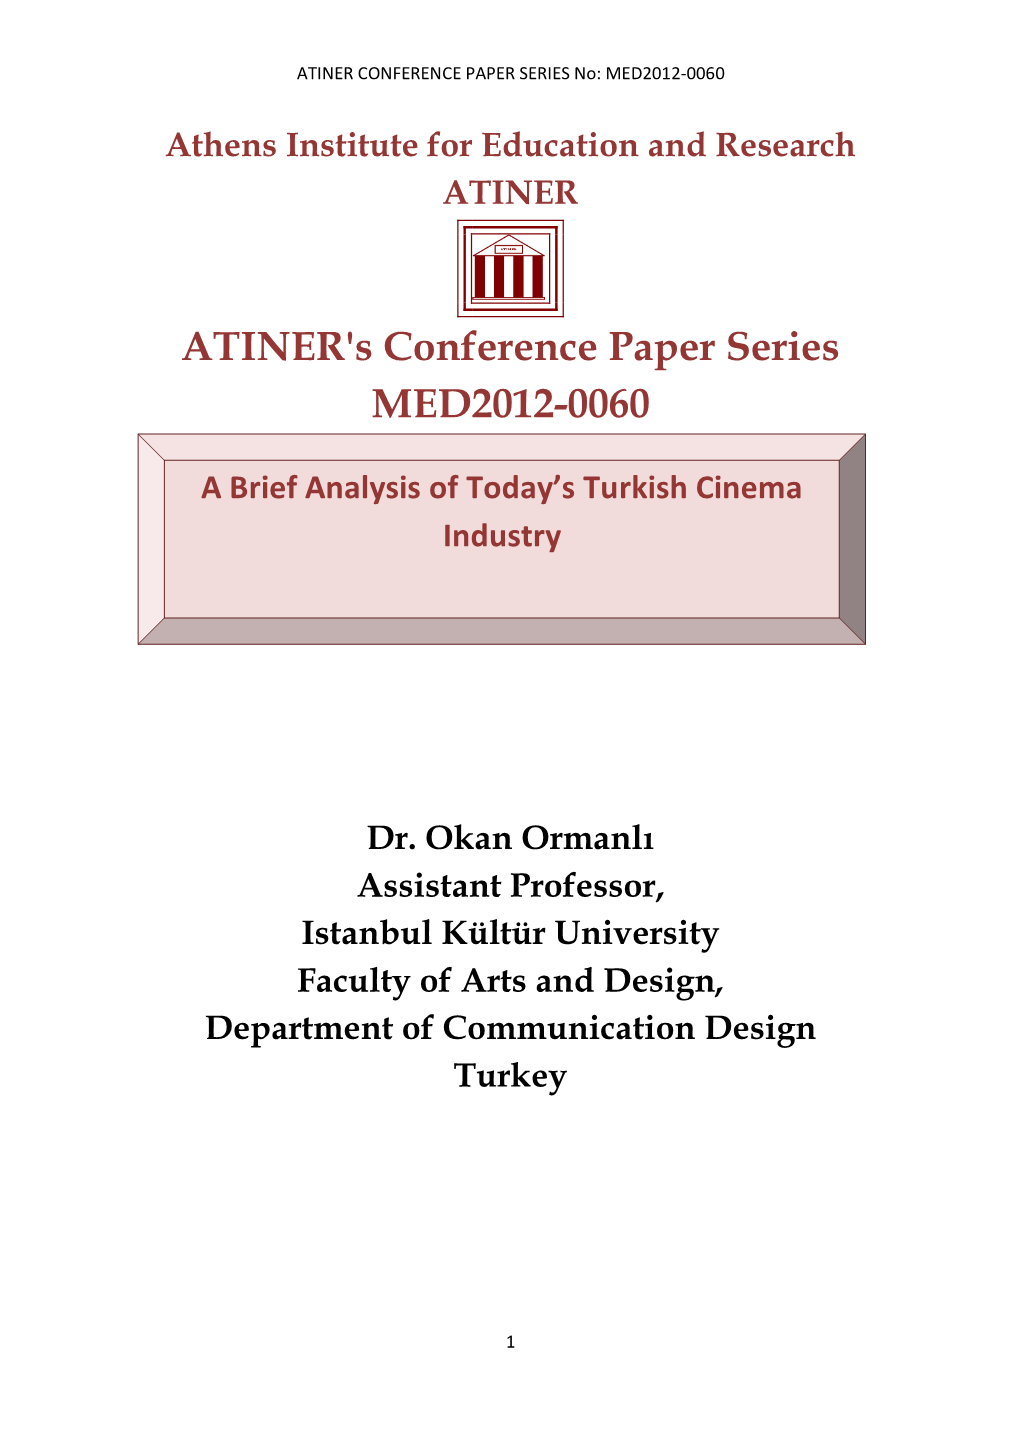 ATINER's Conference Paper Series MED2012-0060